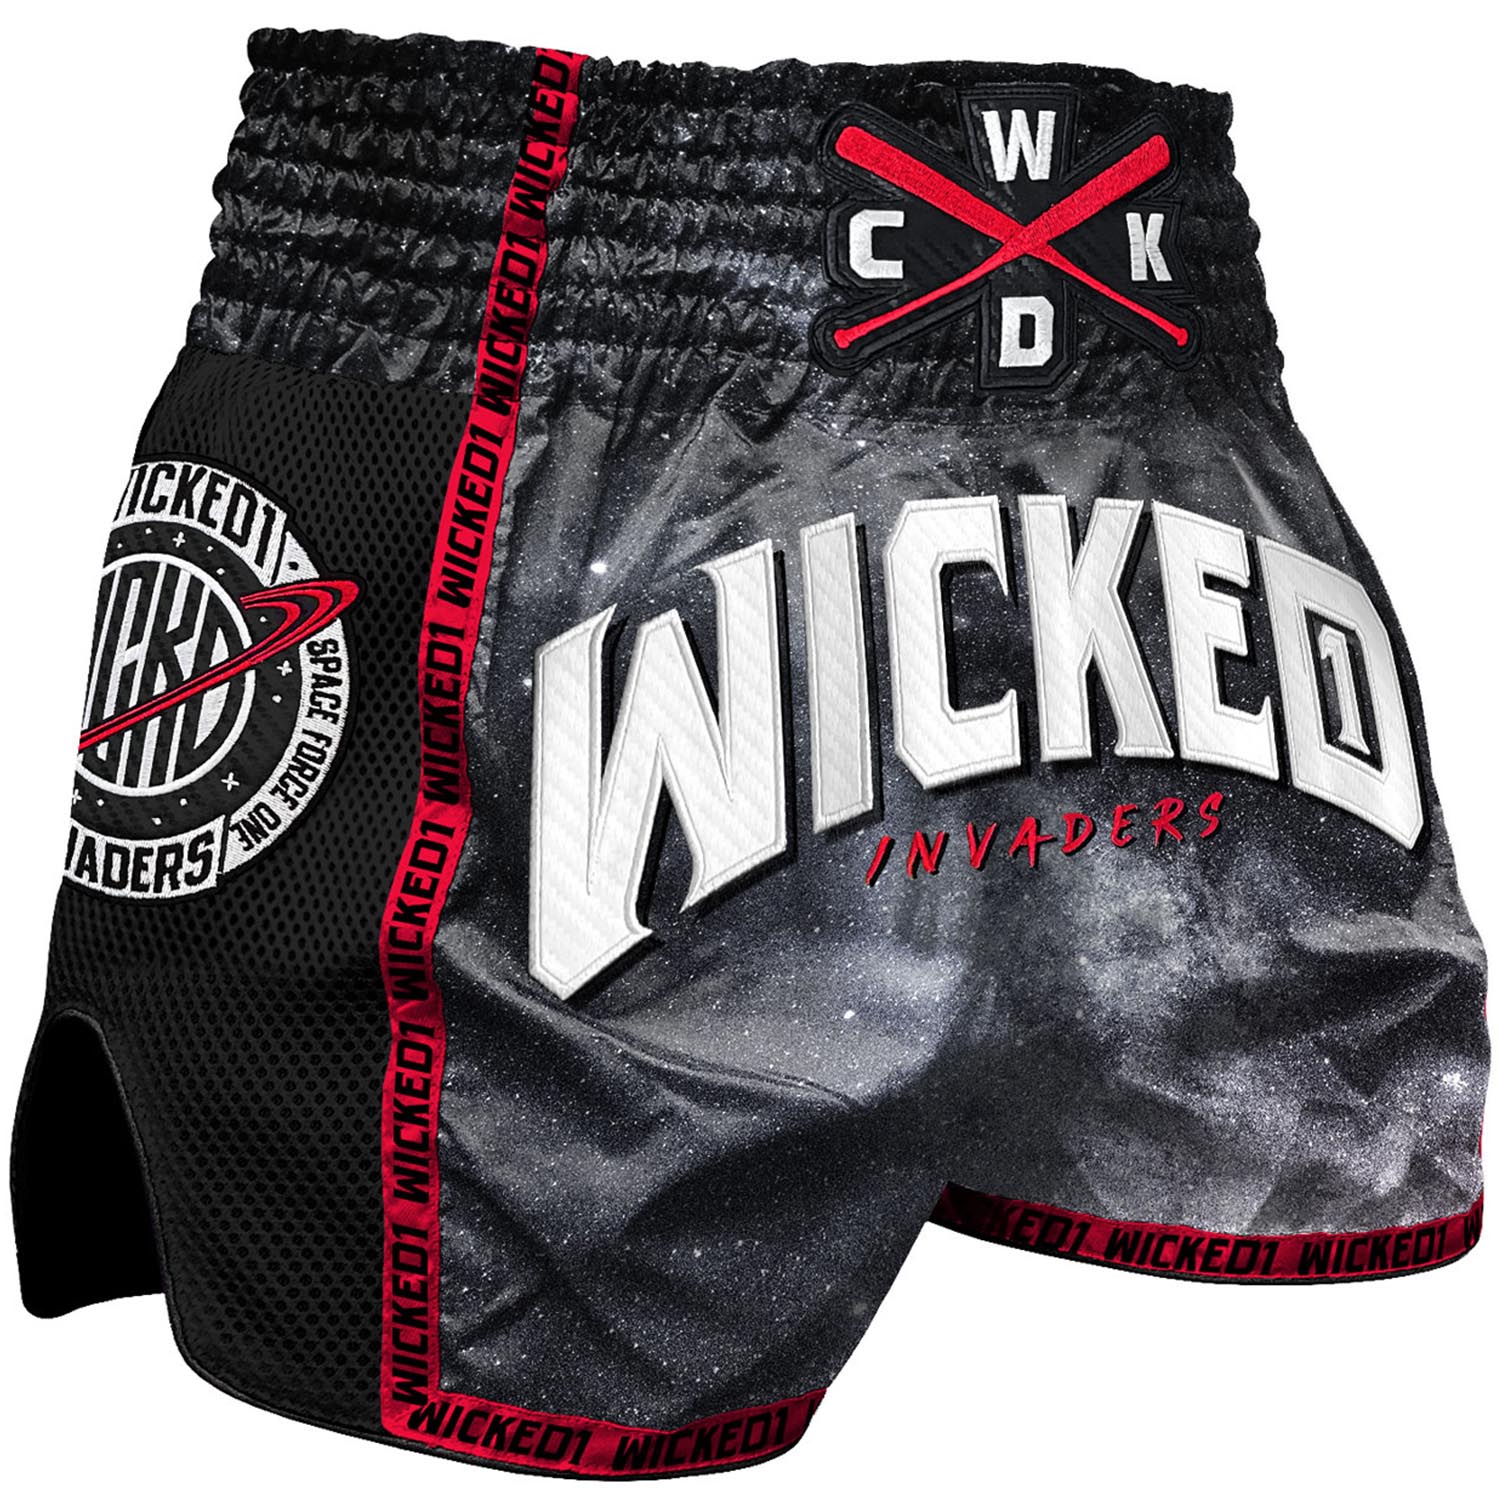 Wicked One Muay Thai Shorts, Invaders, black-red, XL